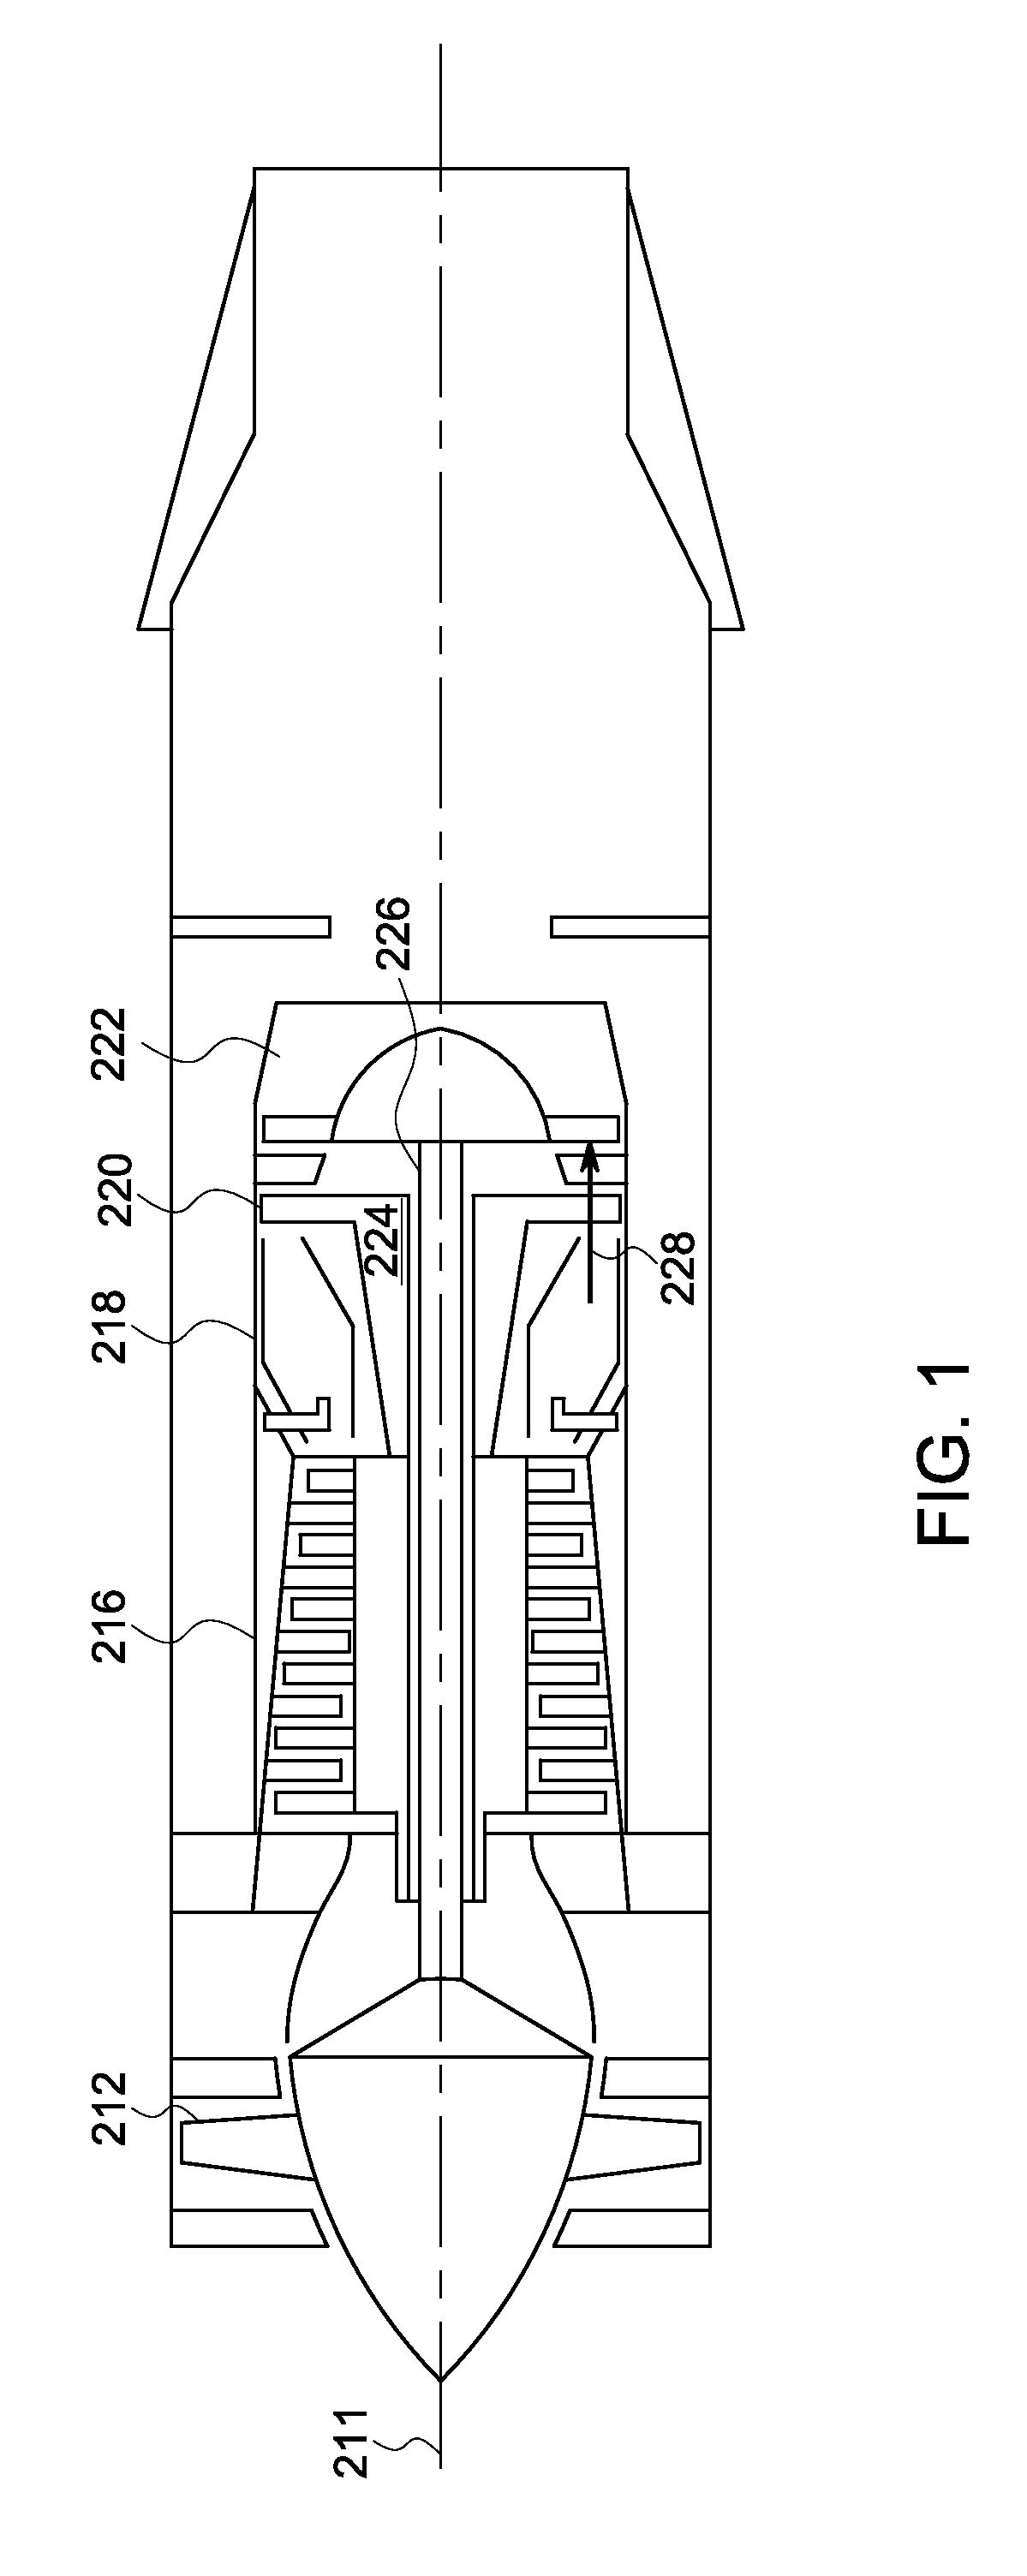 Online systems and methods for thermal inspection of parts